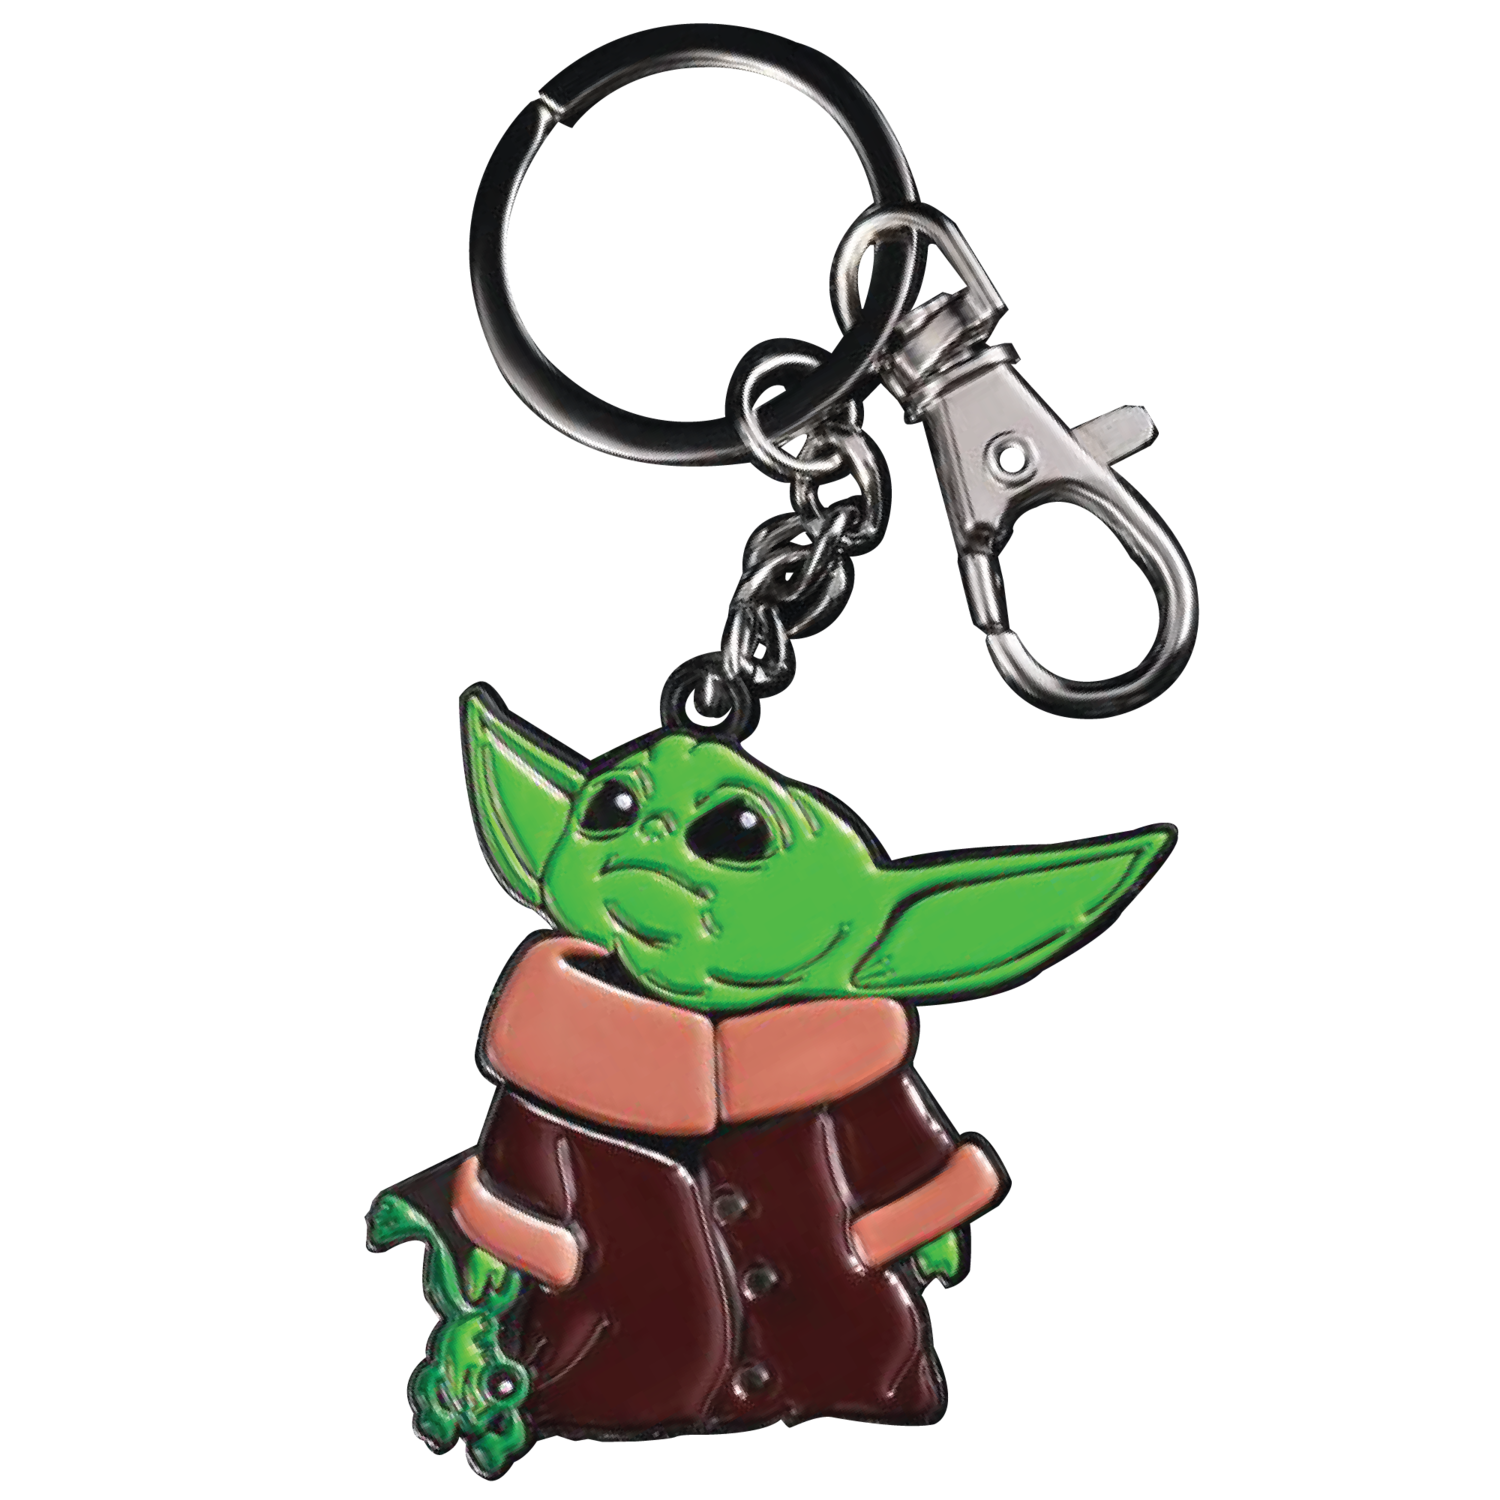 MyPrintOn Baby Yoda 2" with Frog Soft Enamel Nickle Plated Key-Chain with Snap Hook The Child Character from The Star Wars Disney Television Series The Mandalorian